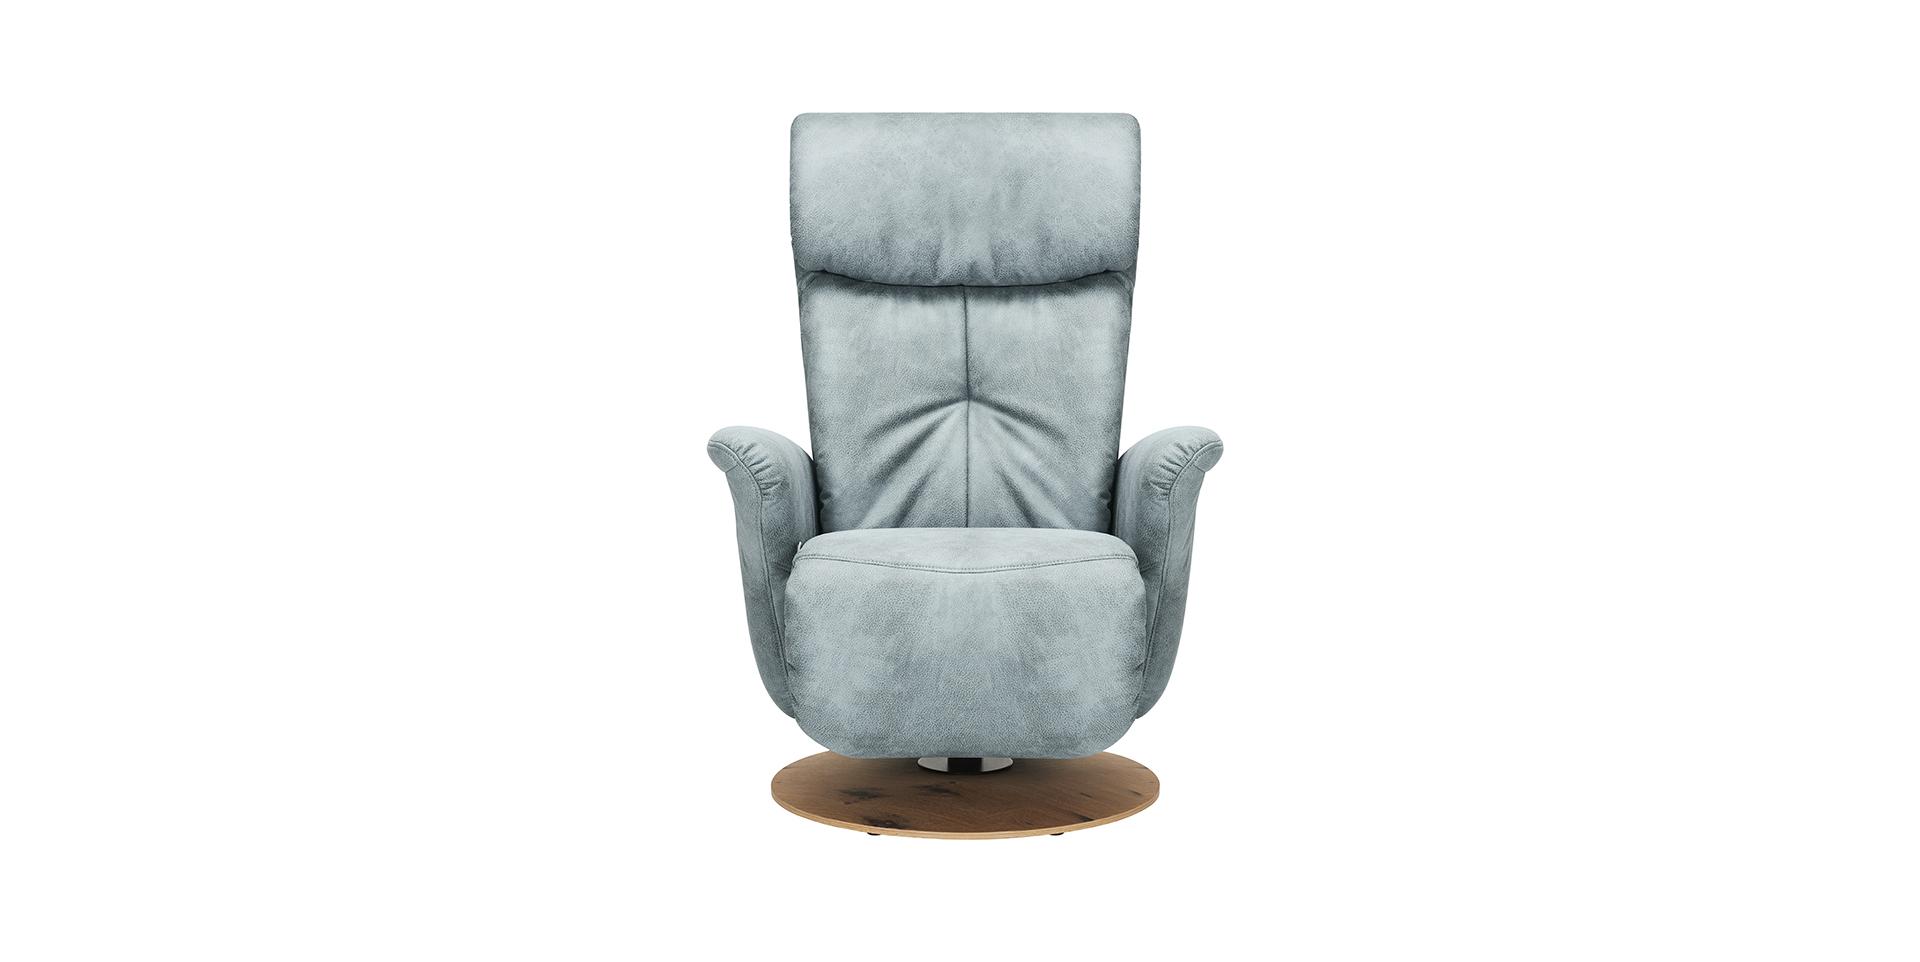 Slider Fauteuil relaxation 7341 (image 3)